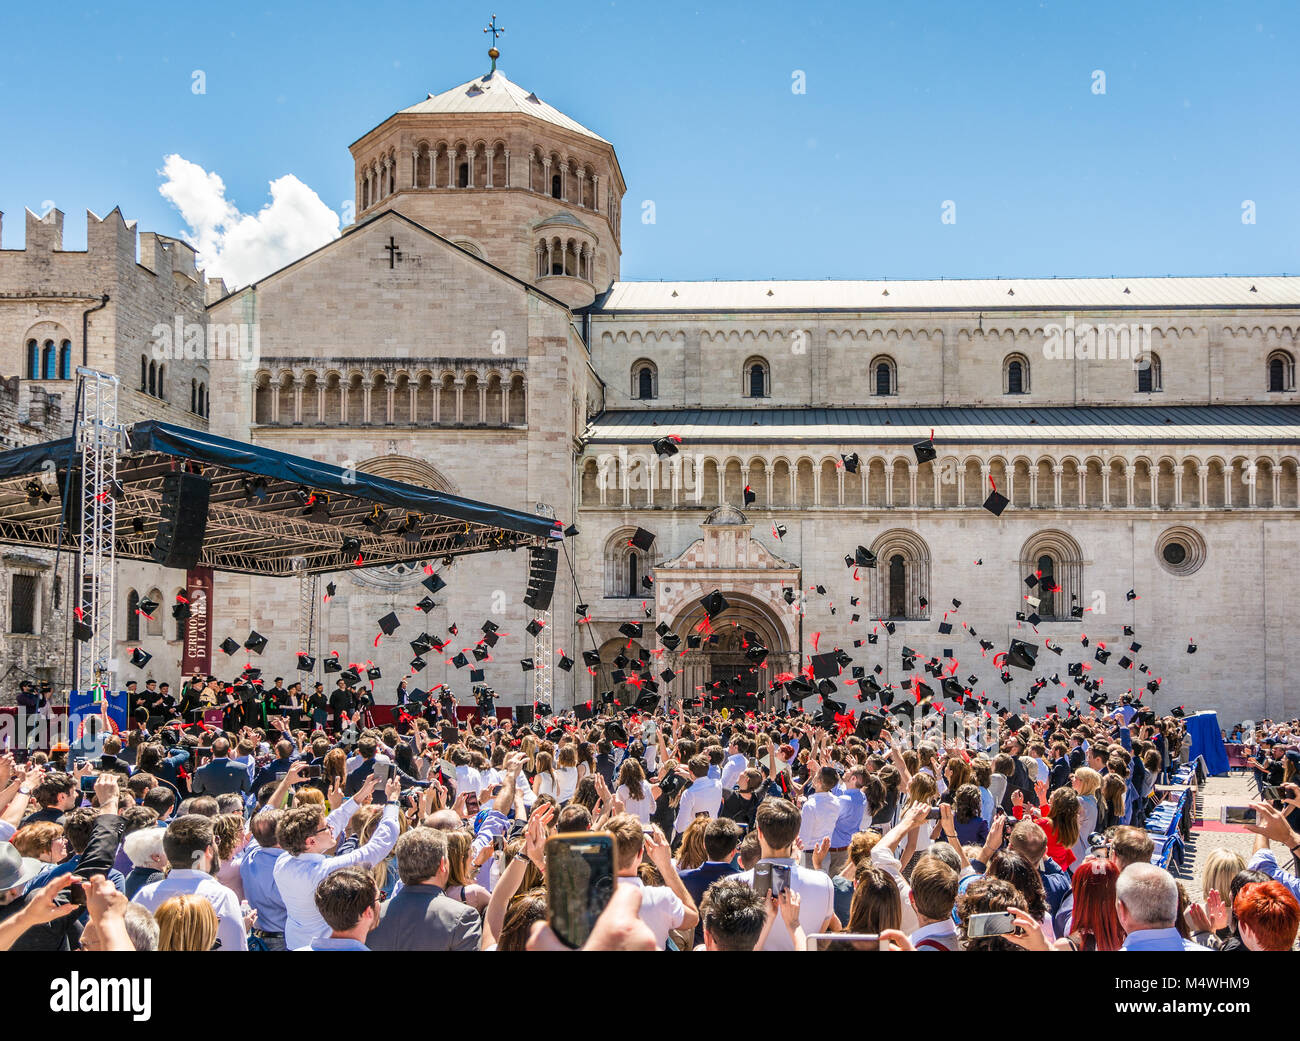 the graduation ceremony in the main square of the city of Trento, italy. The city is famous for the prestigious universities. Stock Photo